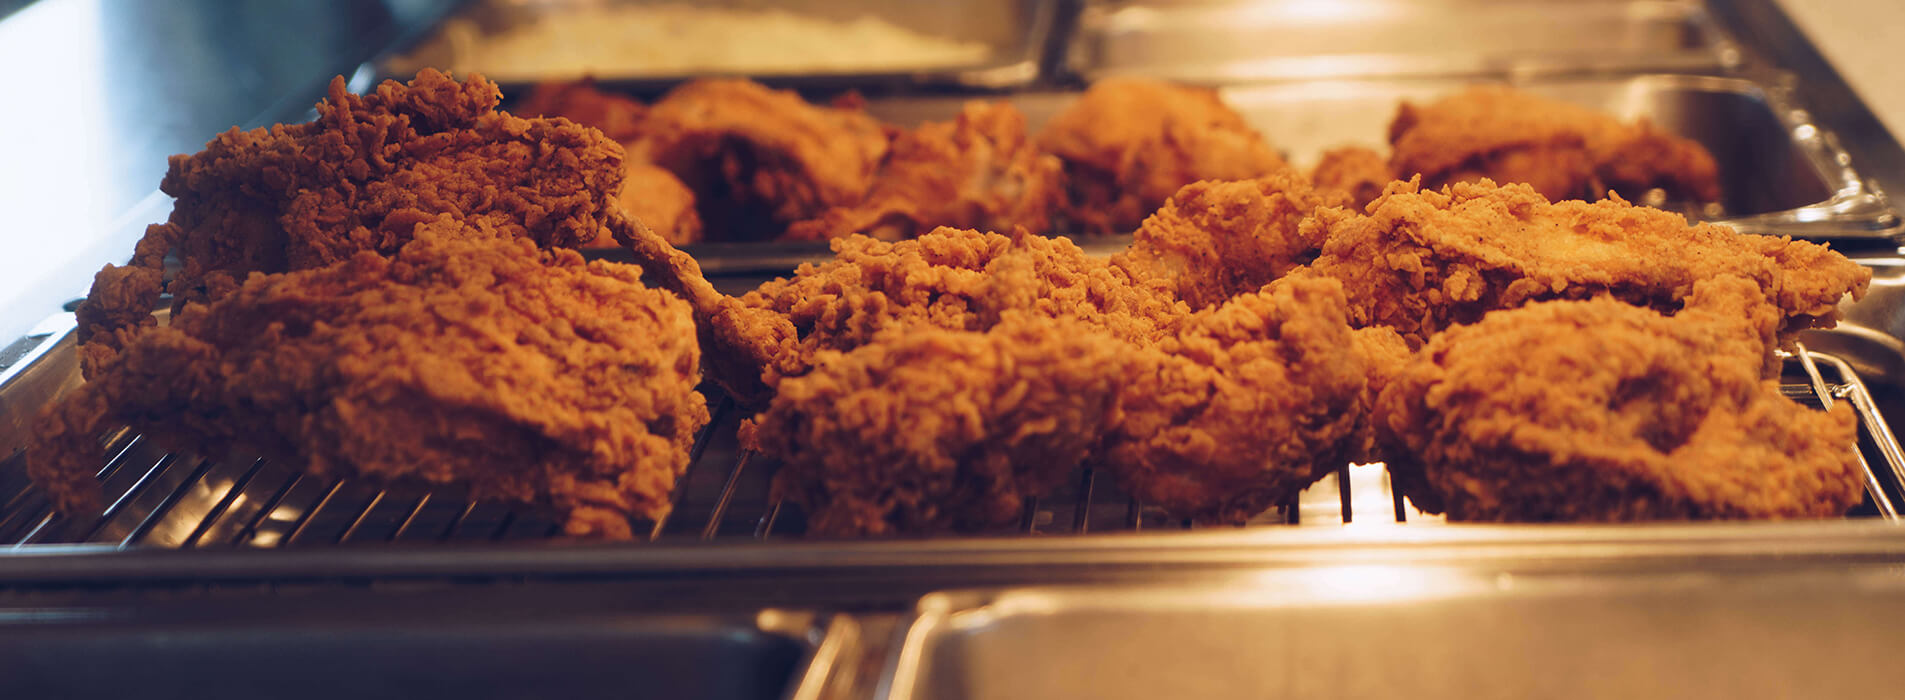 Fried chicken on a heated tray